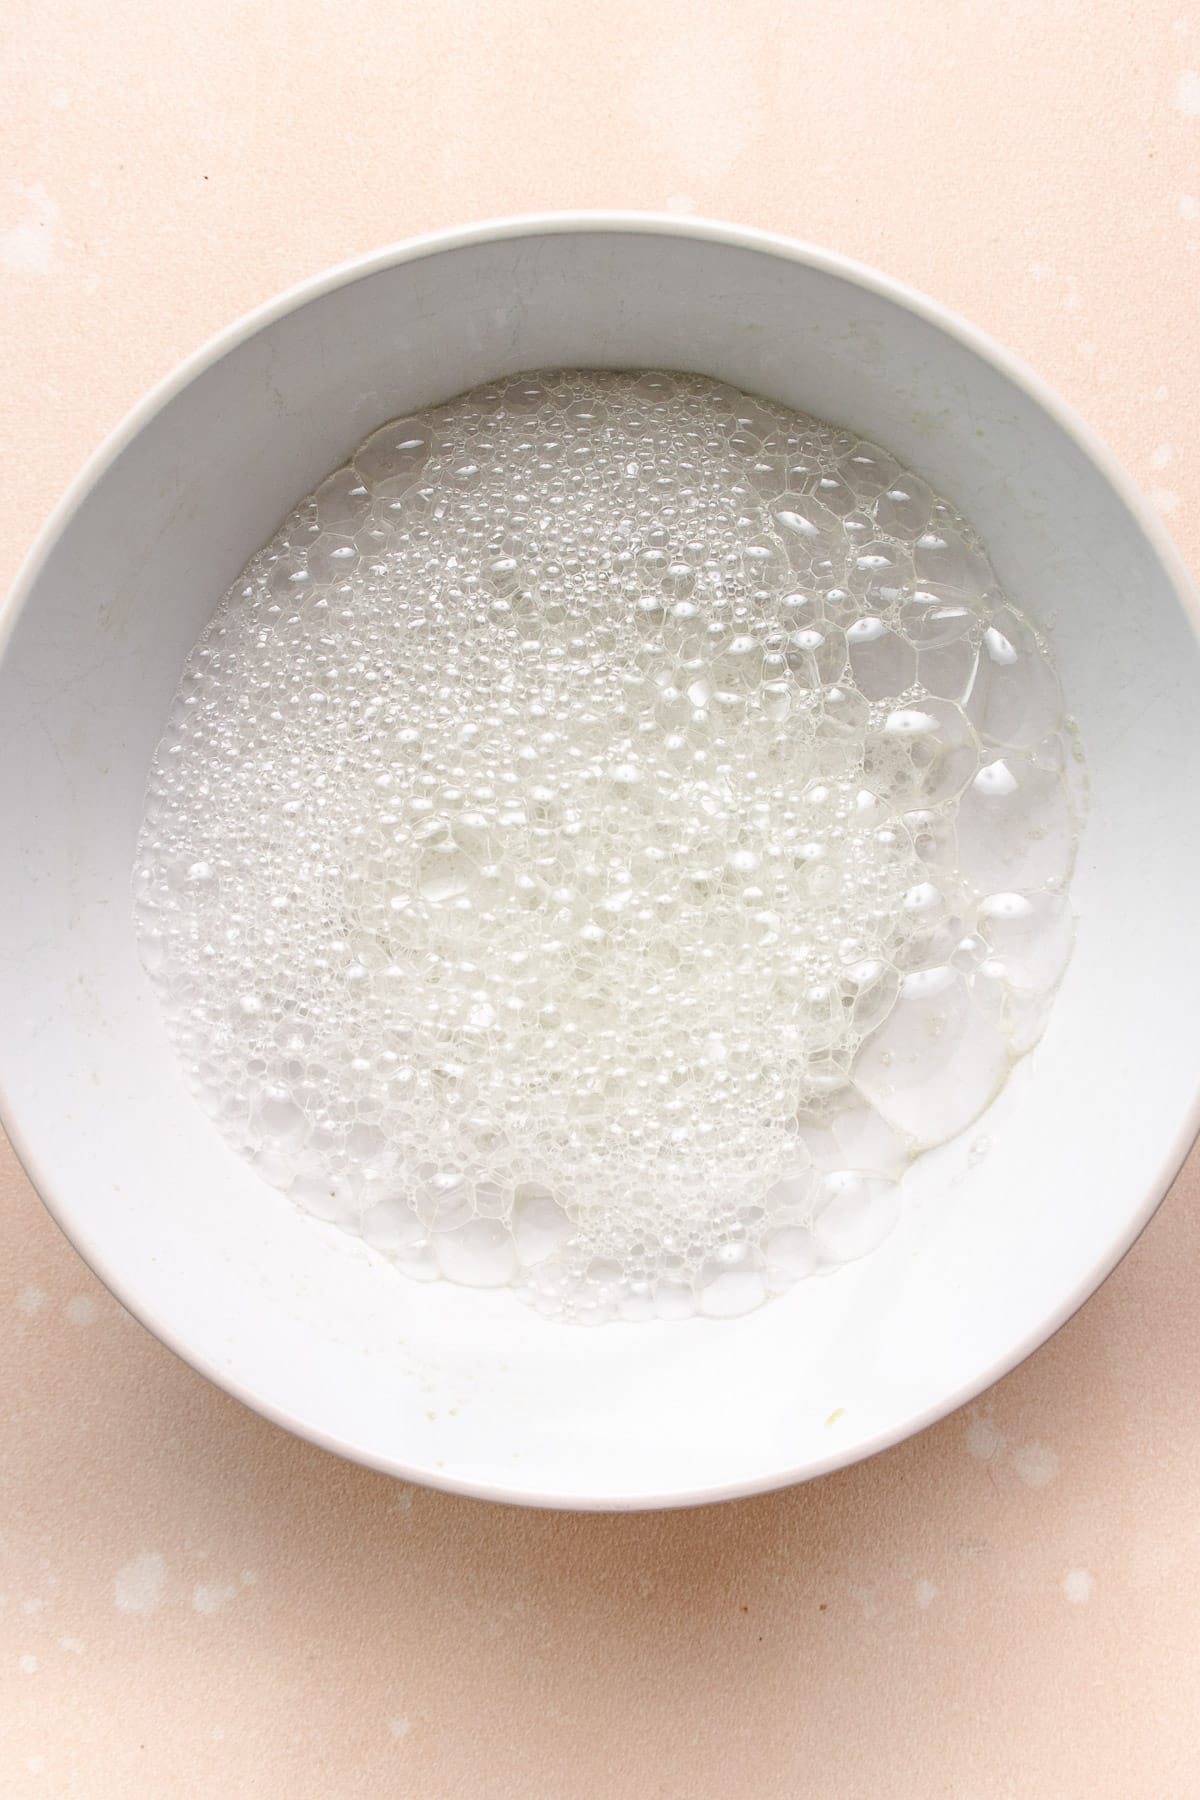 Photo shows a big white bowl with lemon juice mixed with baking soda to create a bubble bath